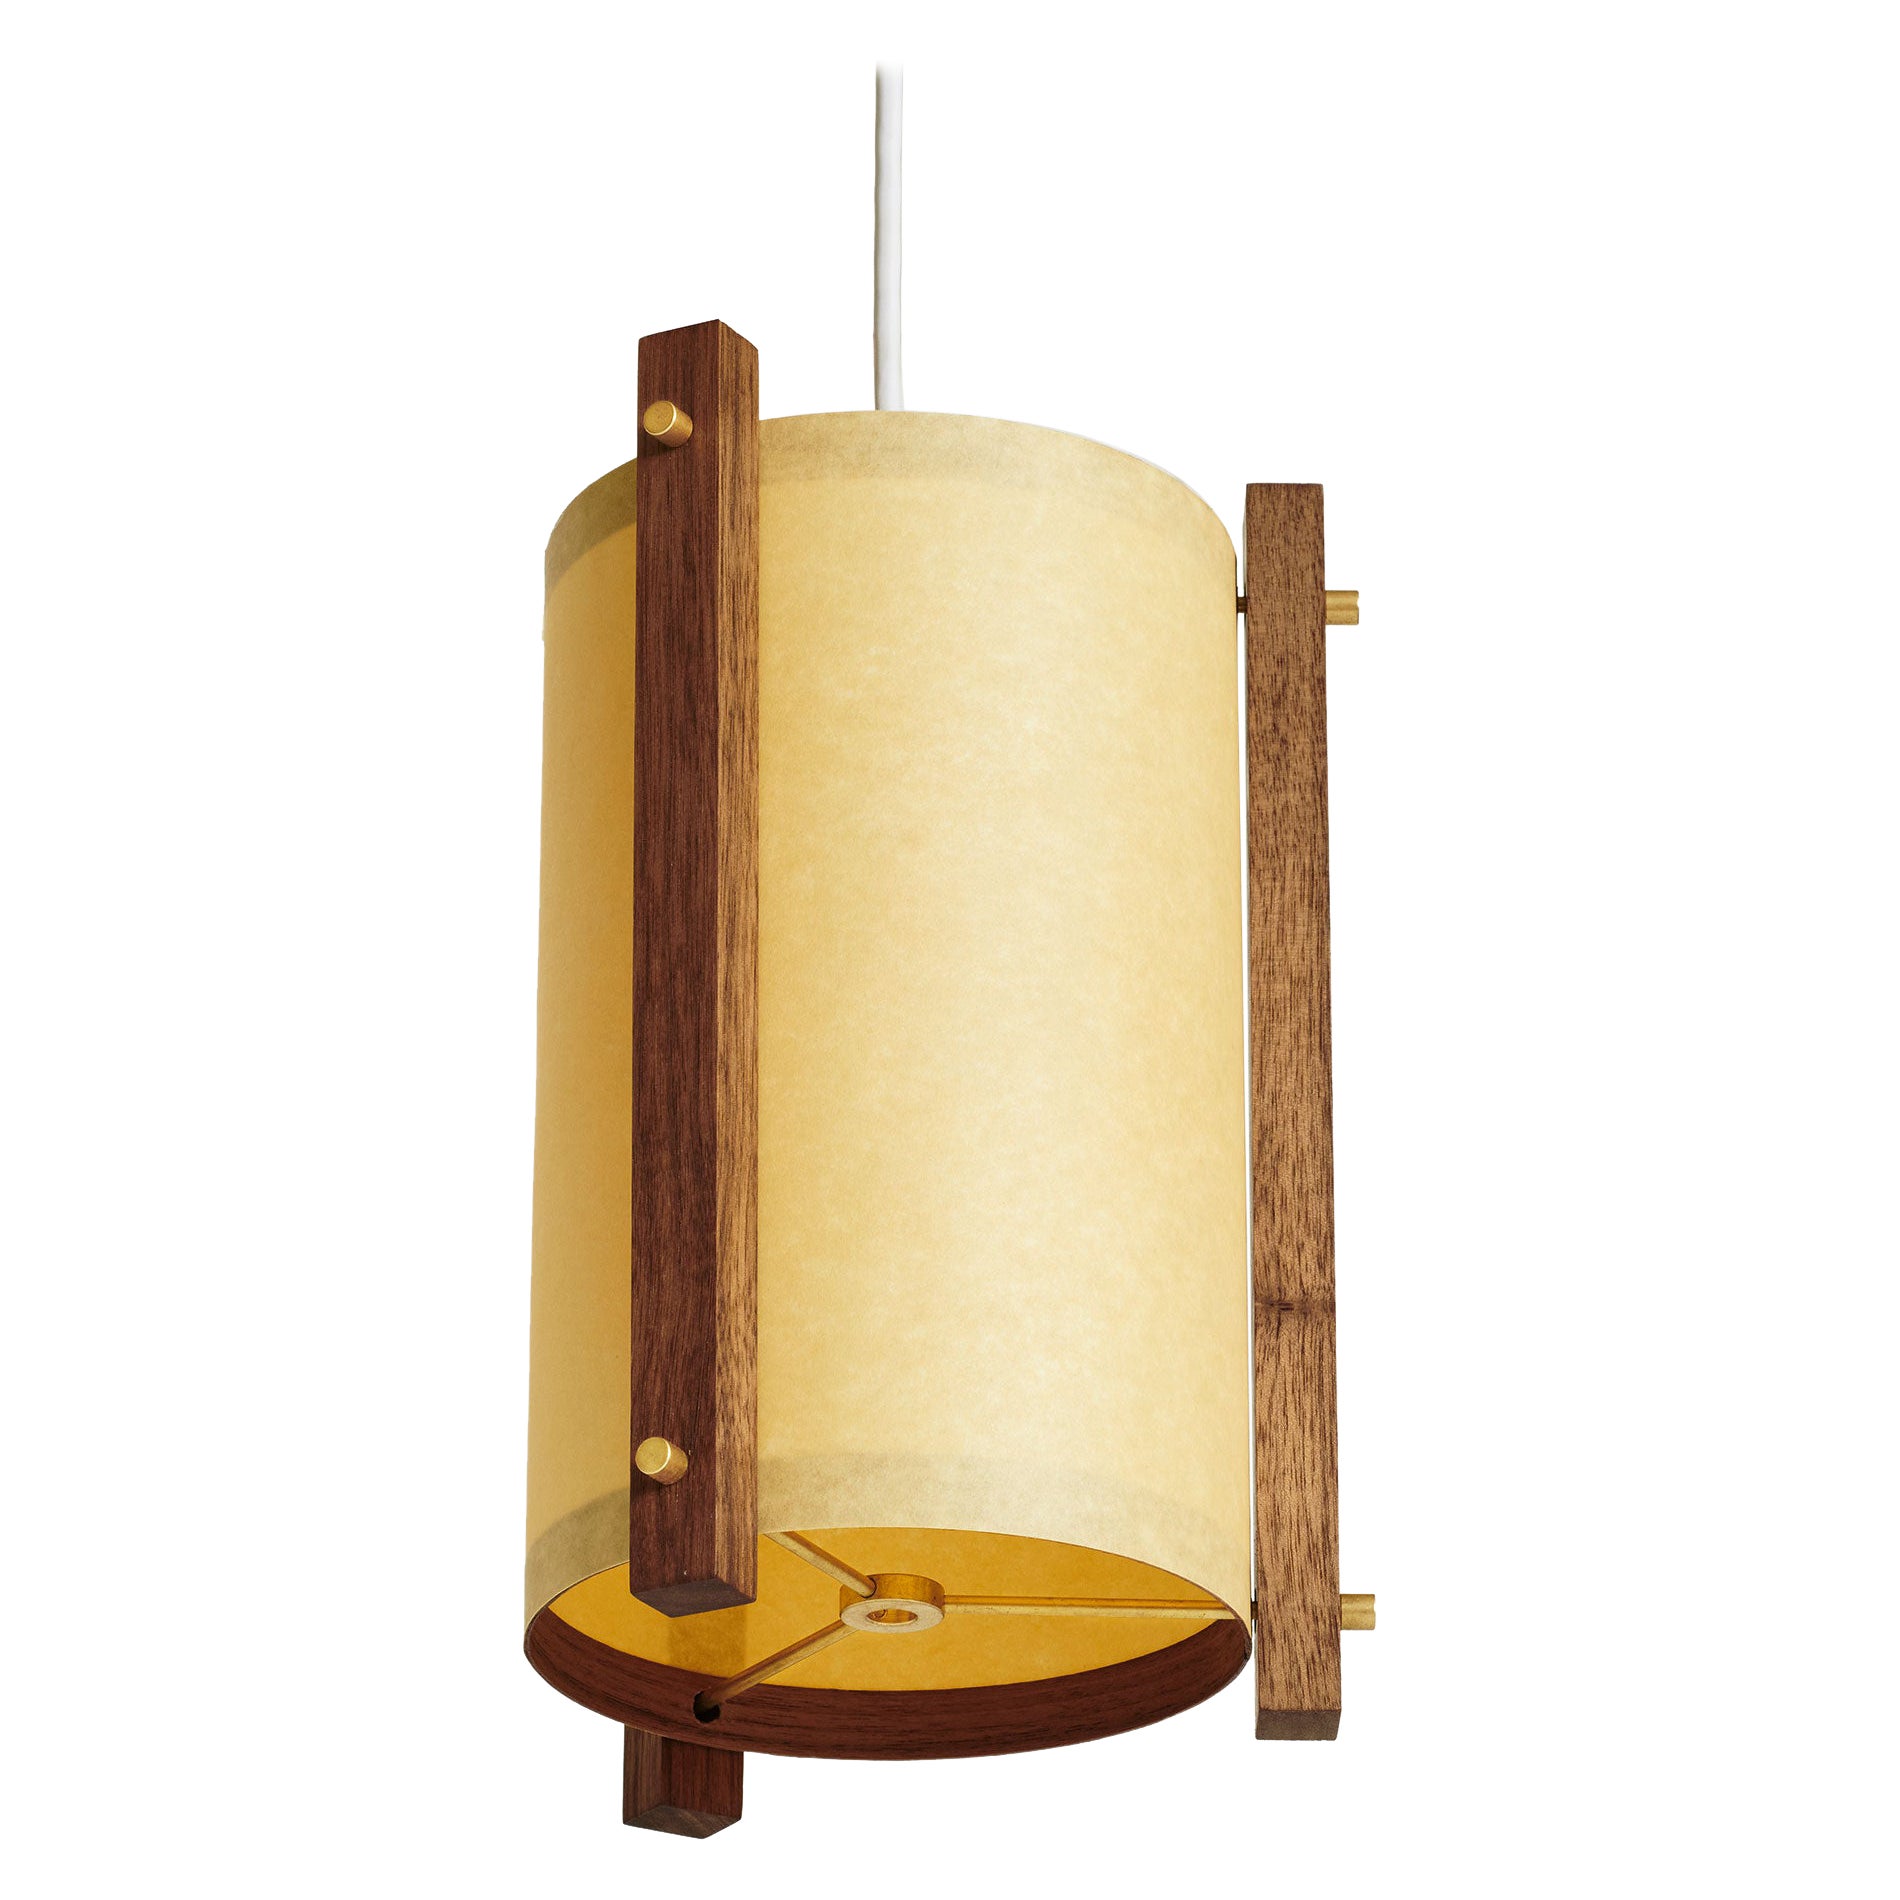 Japanese inspired mid-century Walnut and Brass pendant lamp - small For Sale